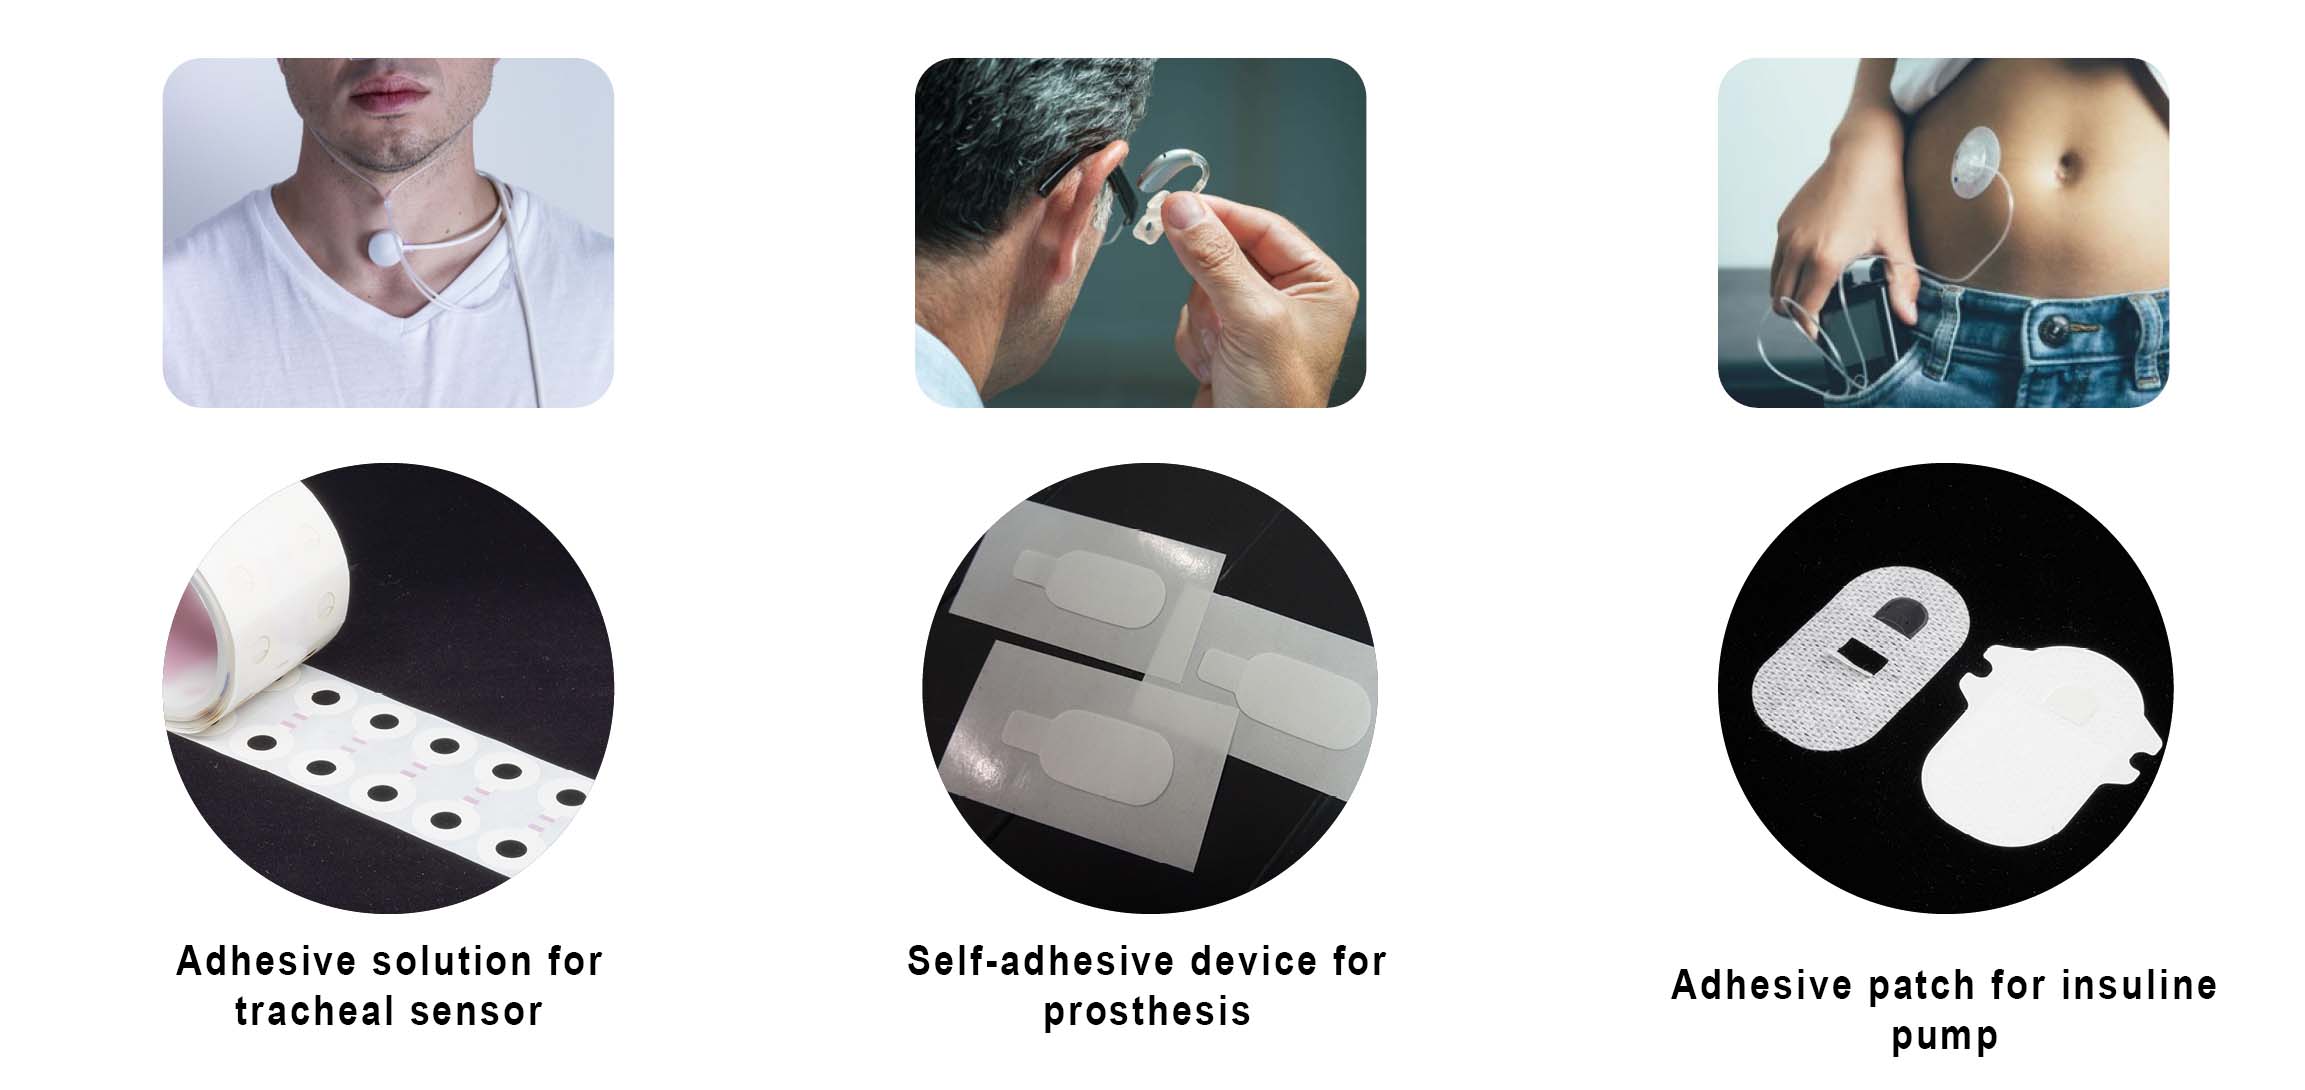 THE BEST QUALITY ADHESIVE TAPES FOR FIXING YOUR WEARABLE MEDICAL DEVICES